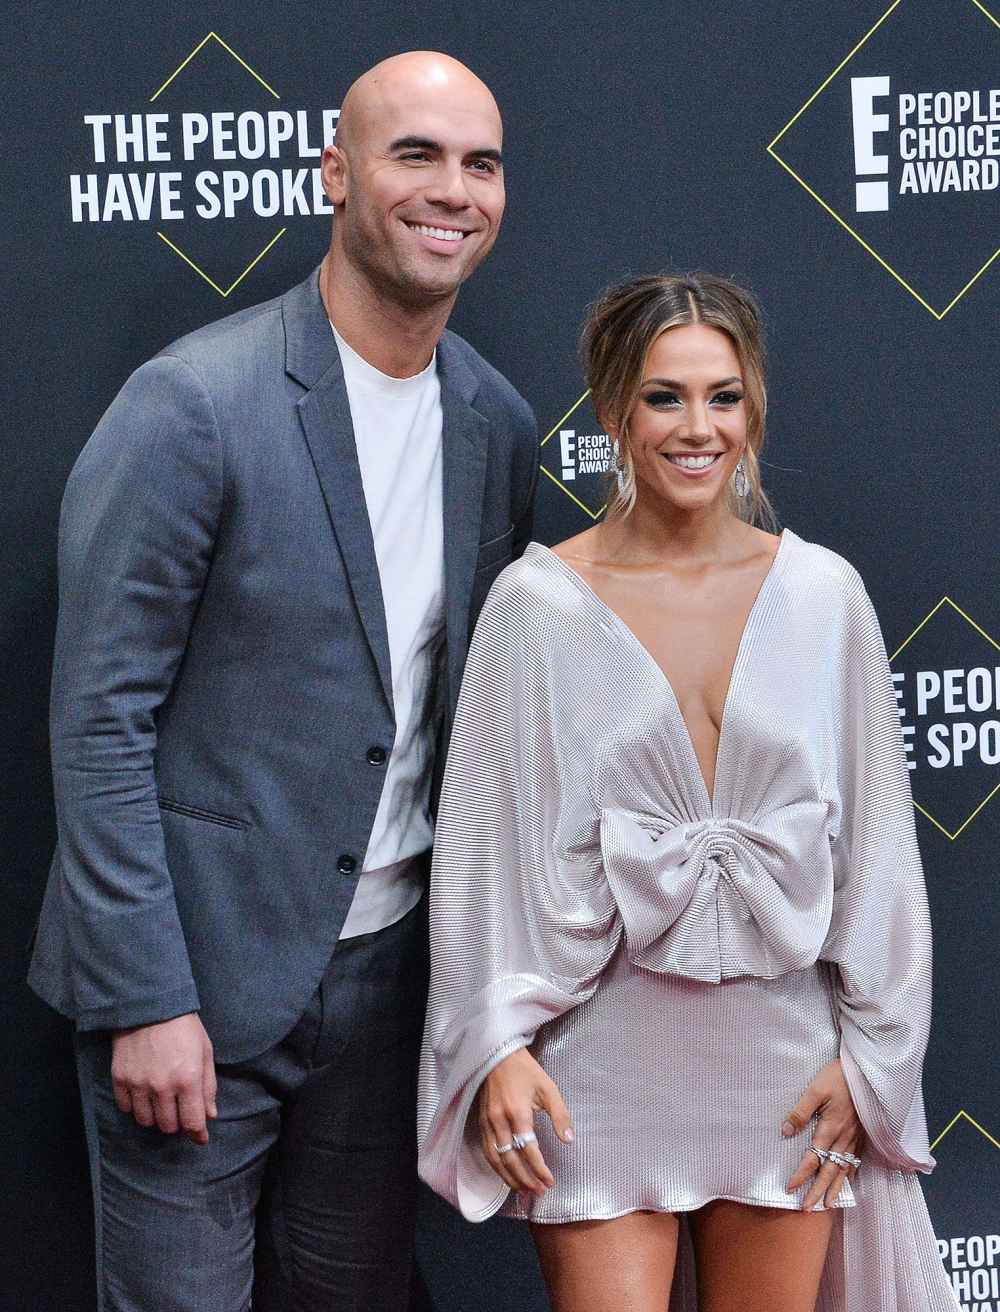 Jana Kramer Claims Ex Husband Mike Caussin Wouldn’t Perform Oral Sex for Years- ‘He Didn’t Do That’ 067 E! People's Choice Awards 2019, Santa Monica, California, United States - 11 Nov 2019